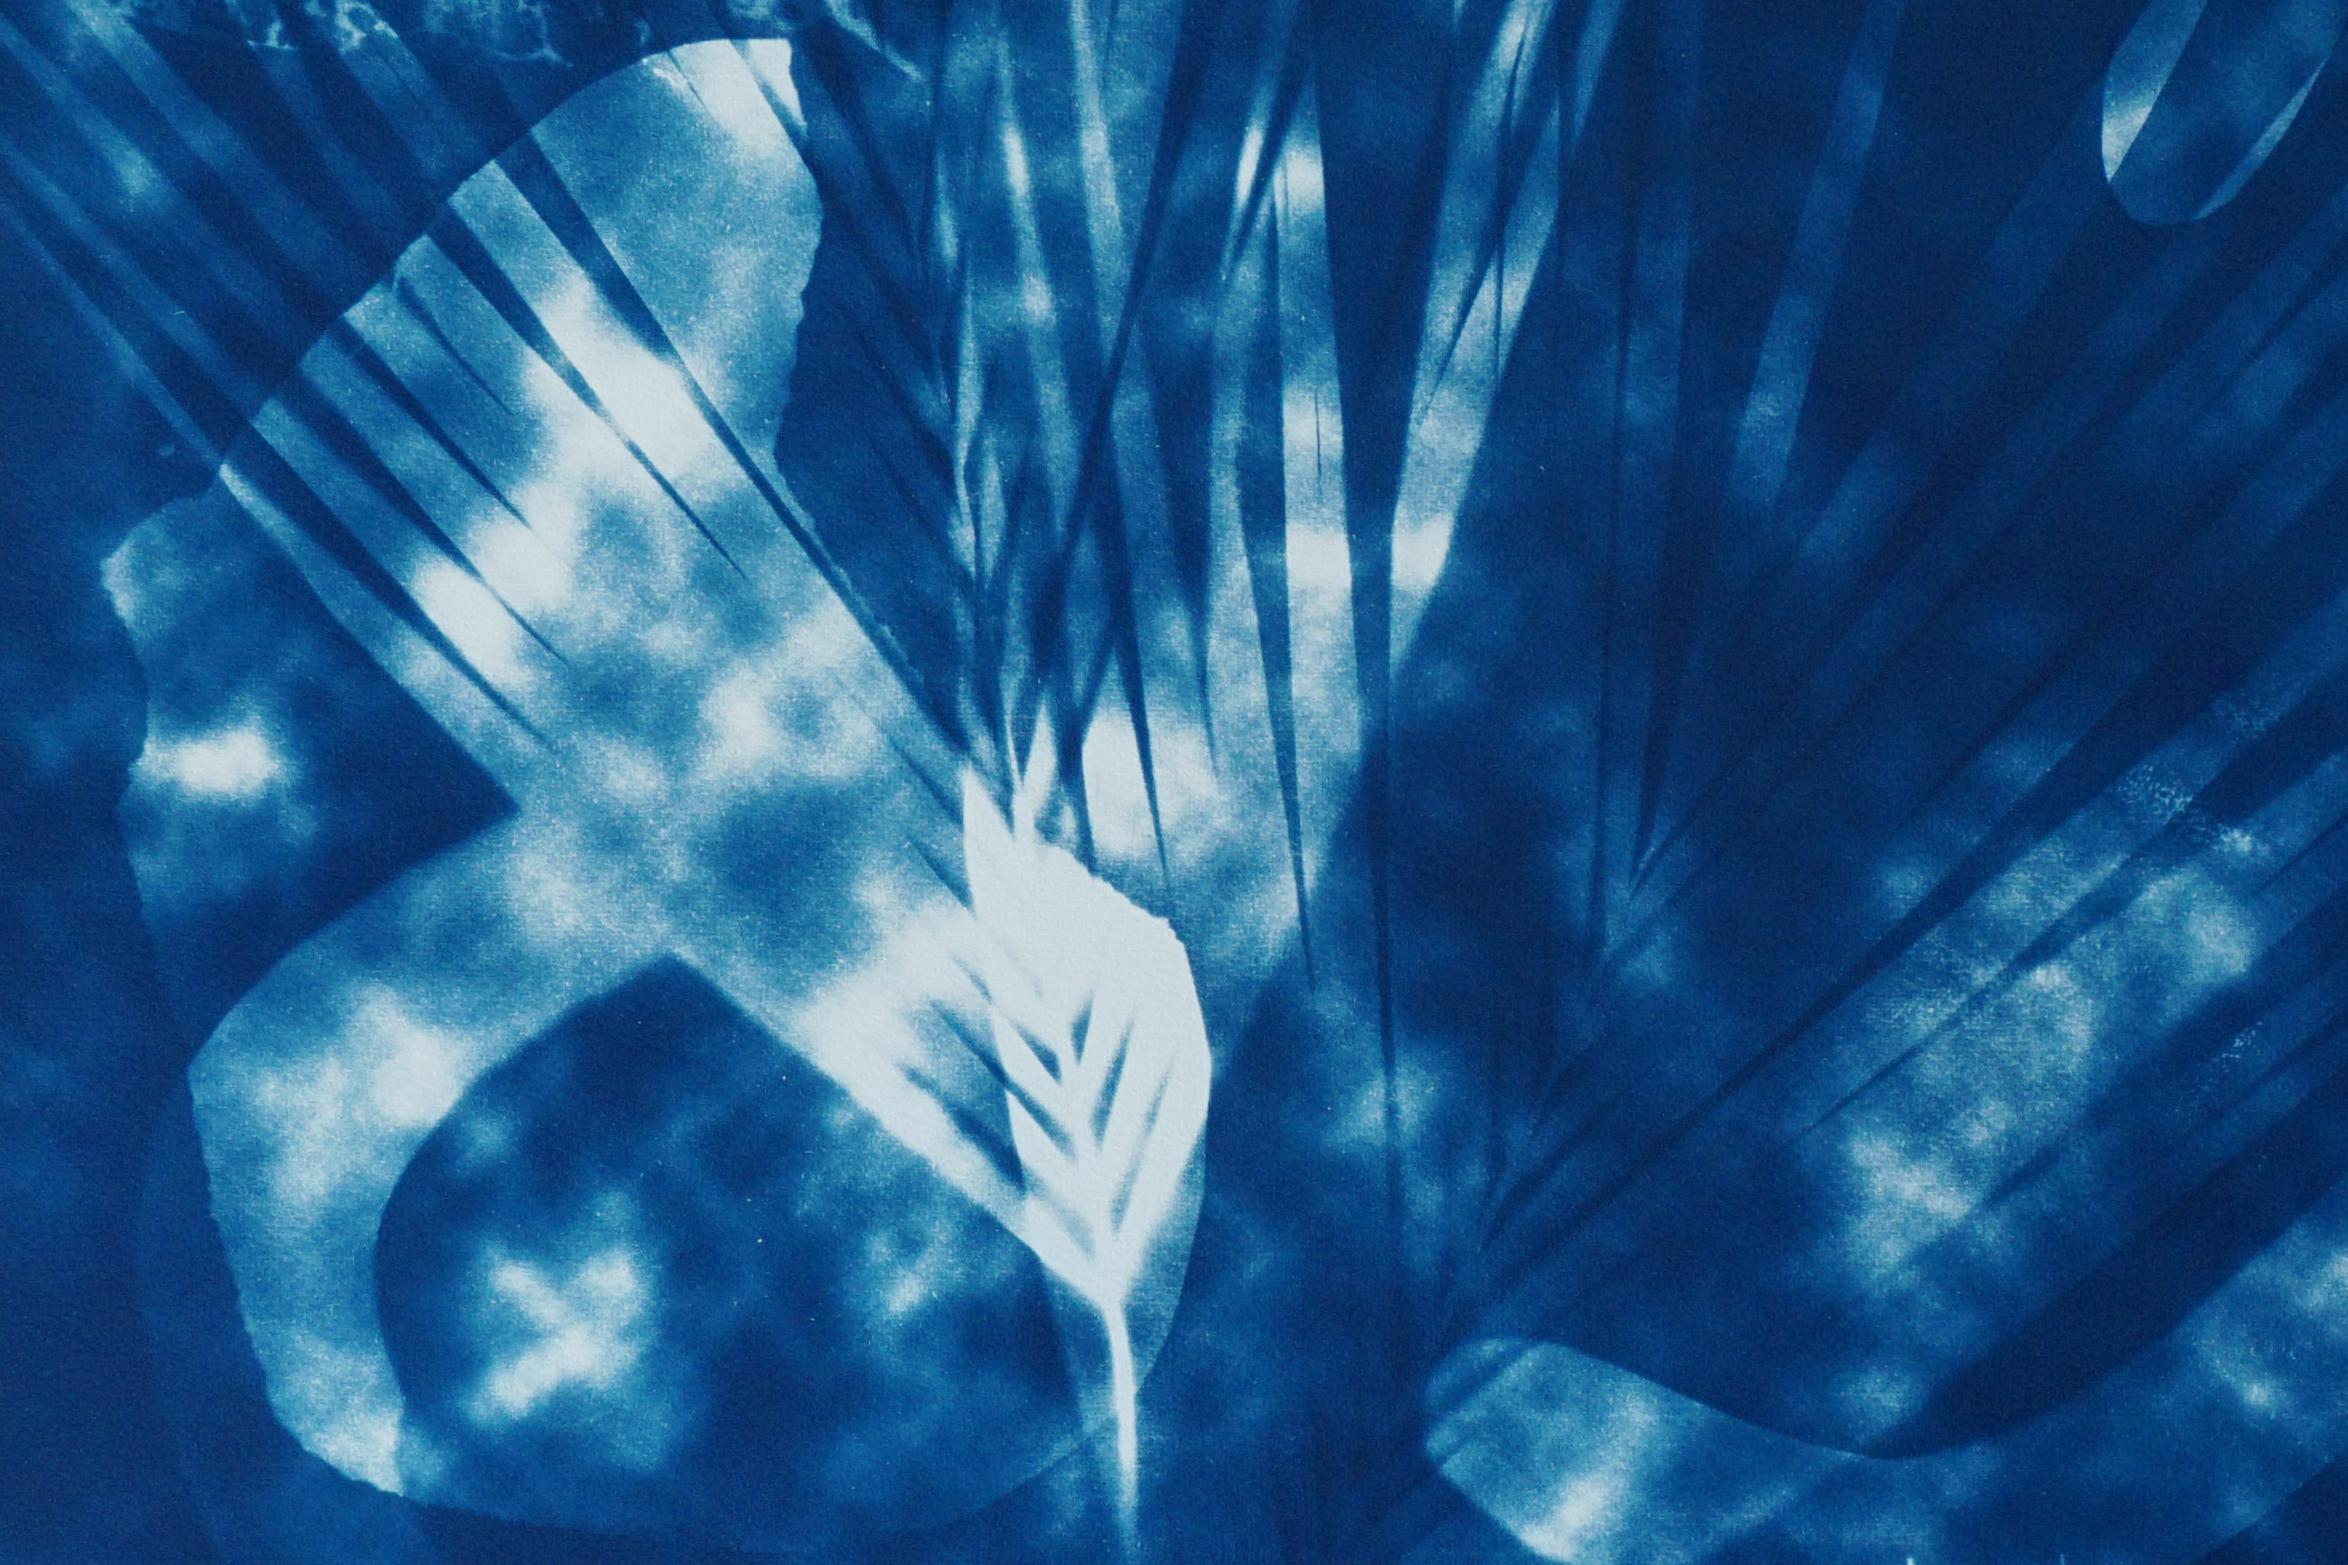 Botanical Cyanotype with Abstract Cloudy Shades on Watercolor Paper, Unique  - Naturalistic Art by Kind of Cyan